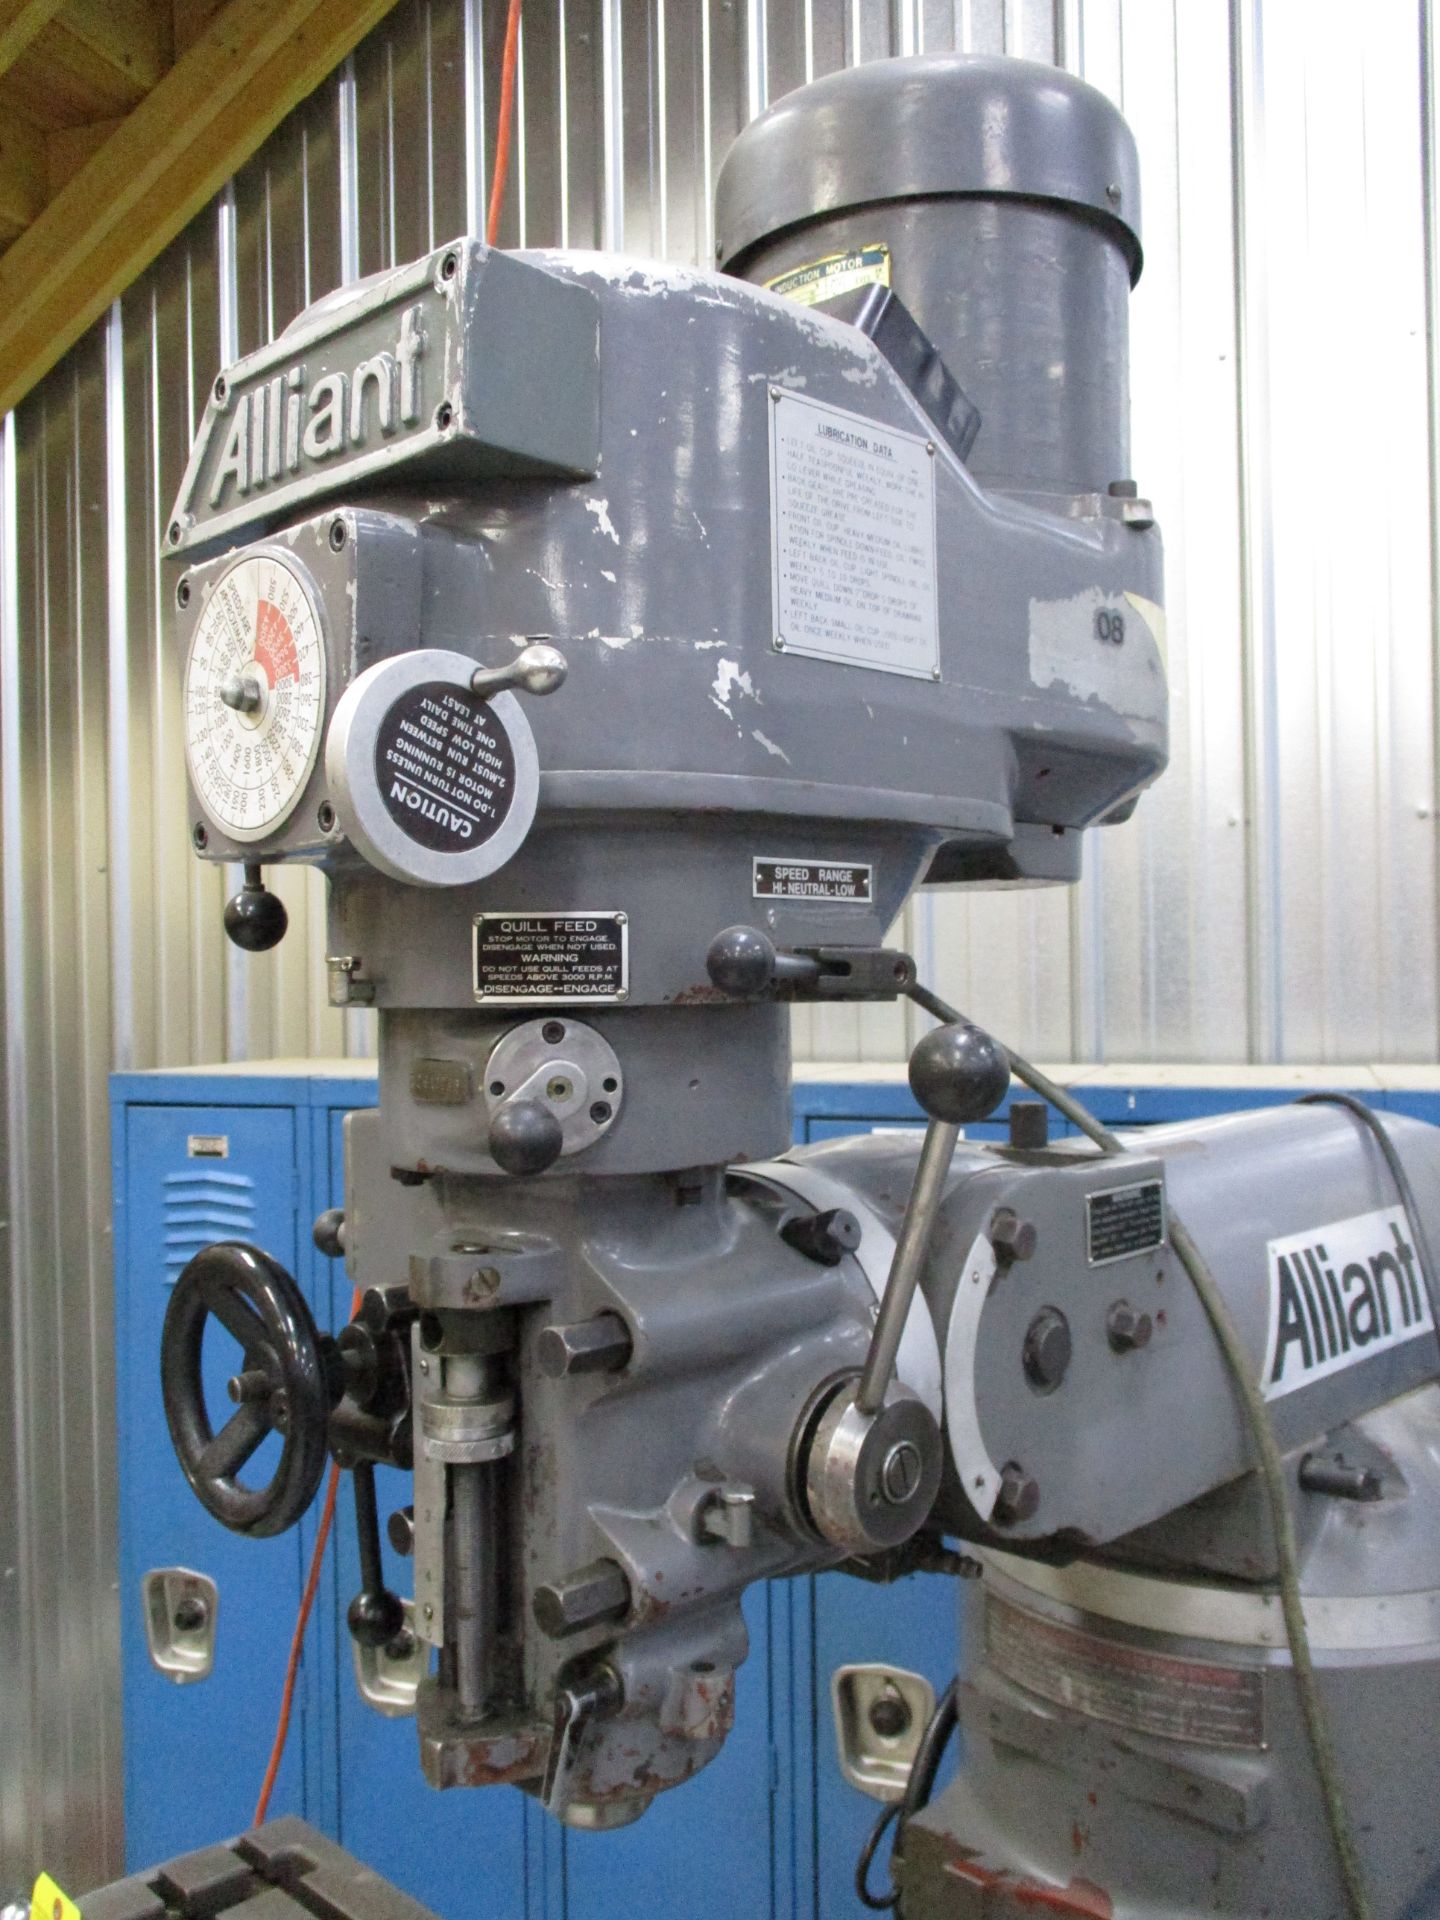 Alliant Vertical Mill, s/n 10917796, 2 HP, 9” X 42” Table, Loading Fee $100.00 - Image 2 of 5